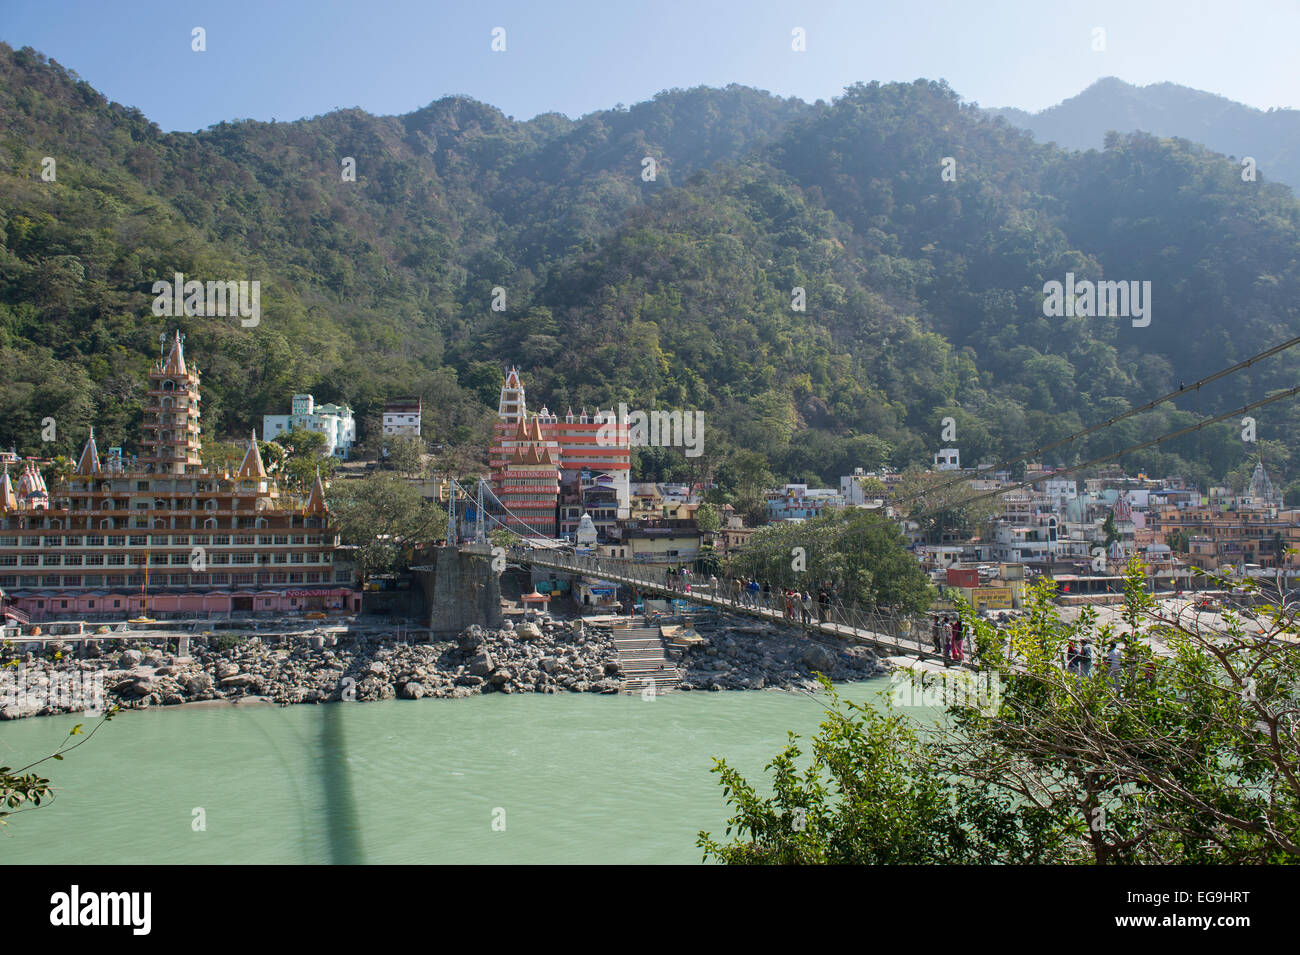 The Temples and mountains of Rishikesh with Lakshman Jhula bridge in the foreground which crosses the Ganges or Ganga river. Stock Photo